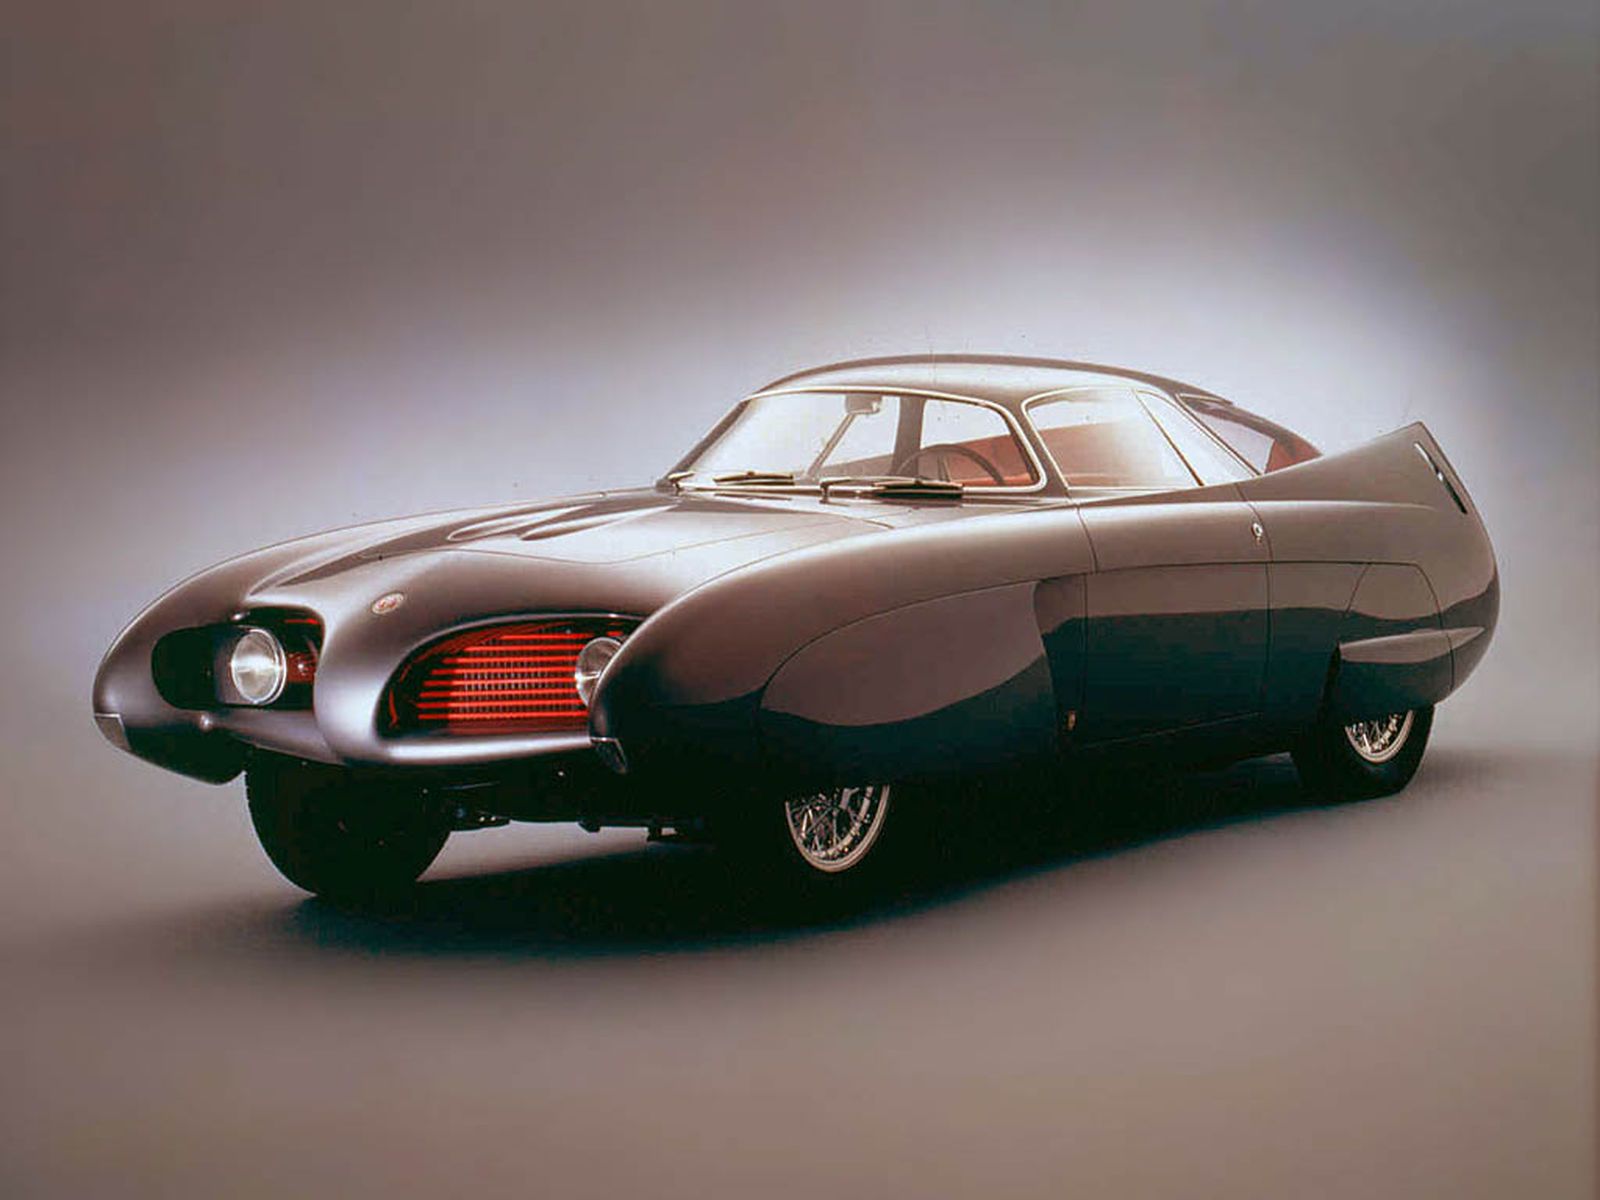 30 incredibly bonkers and beautiful cars from the 1950s to now image 4